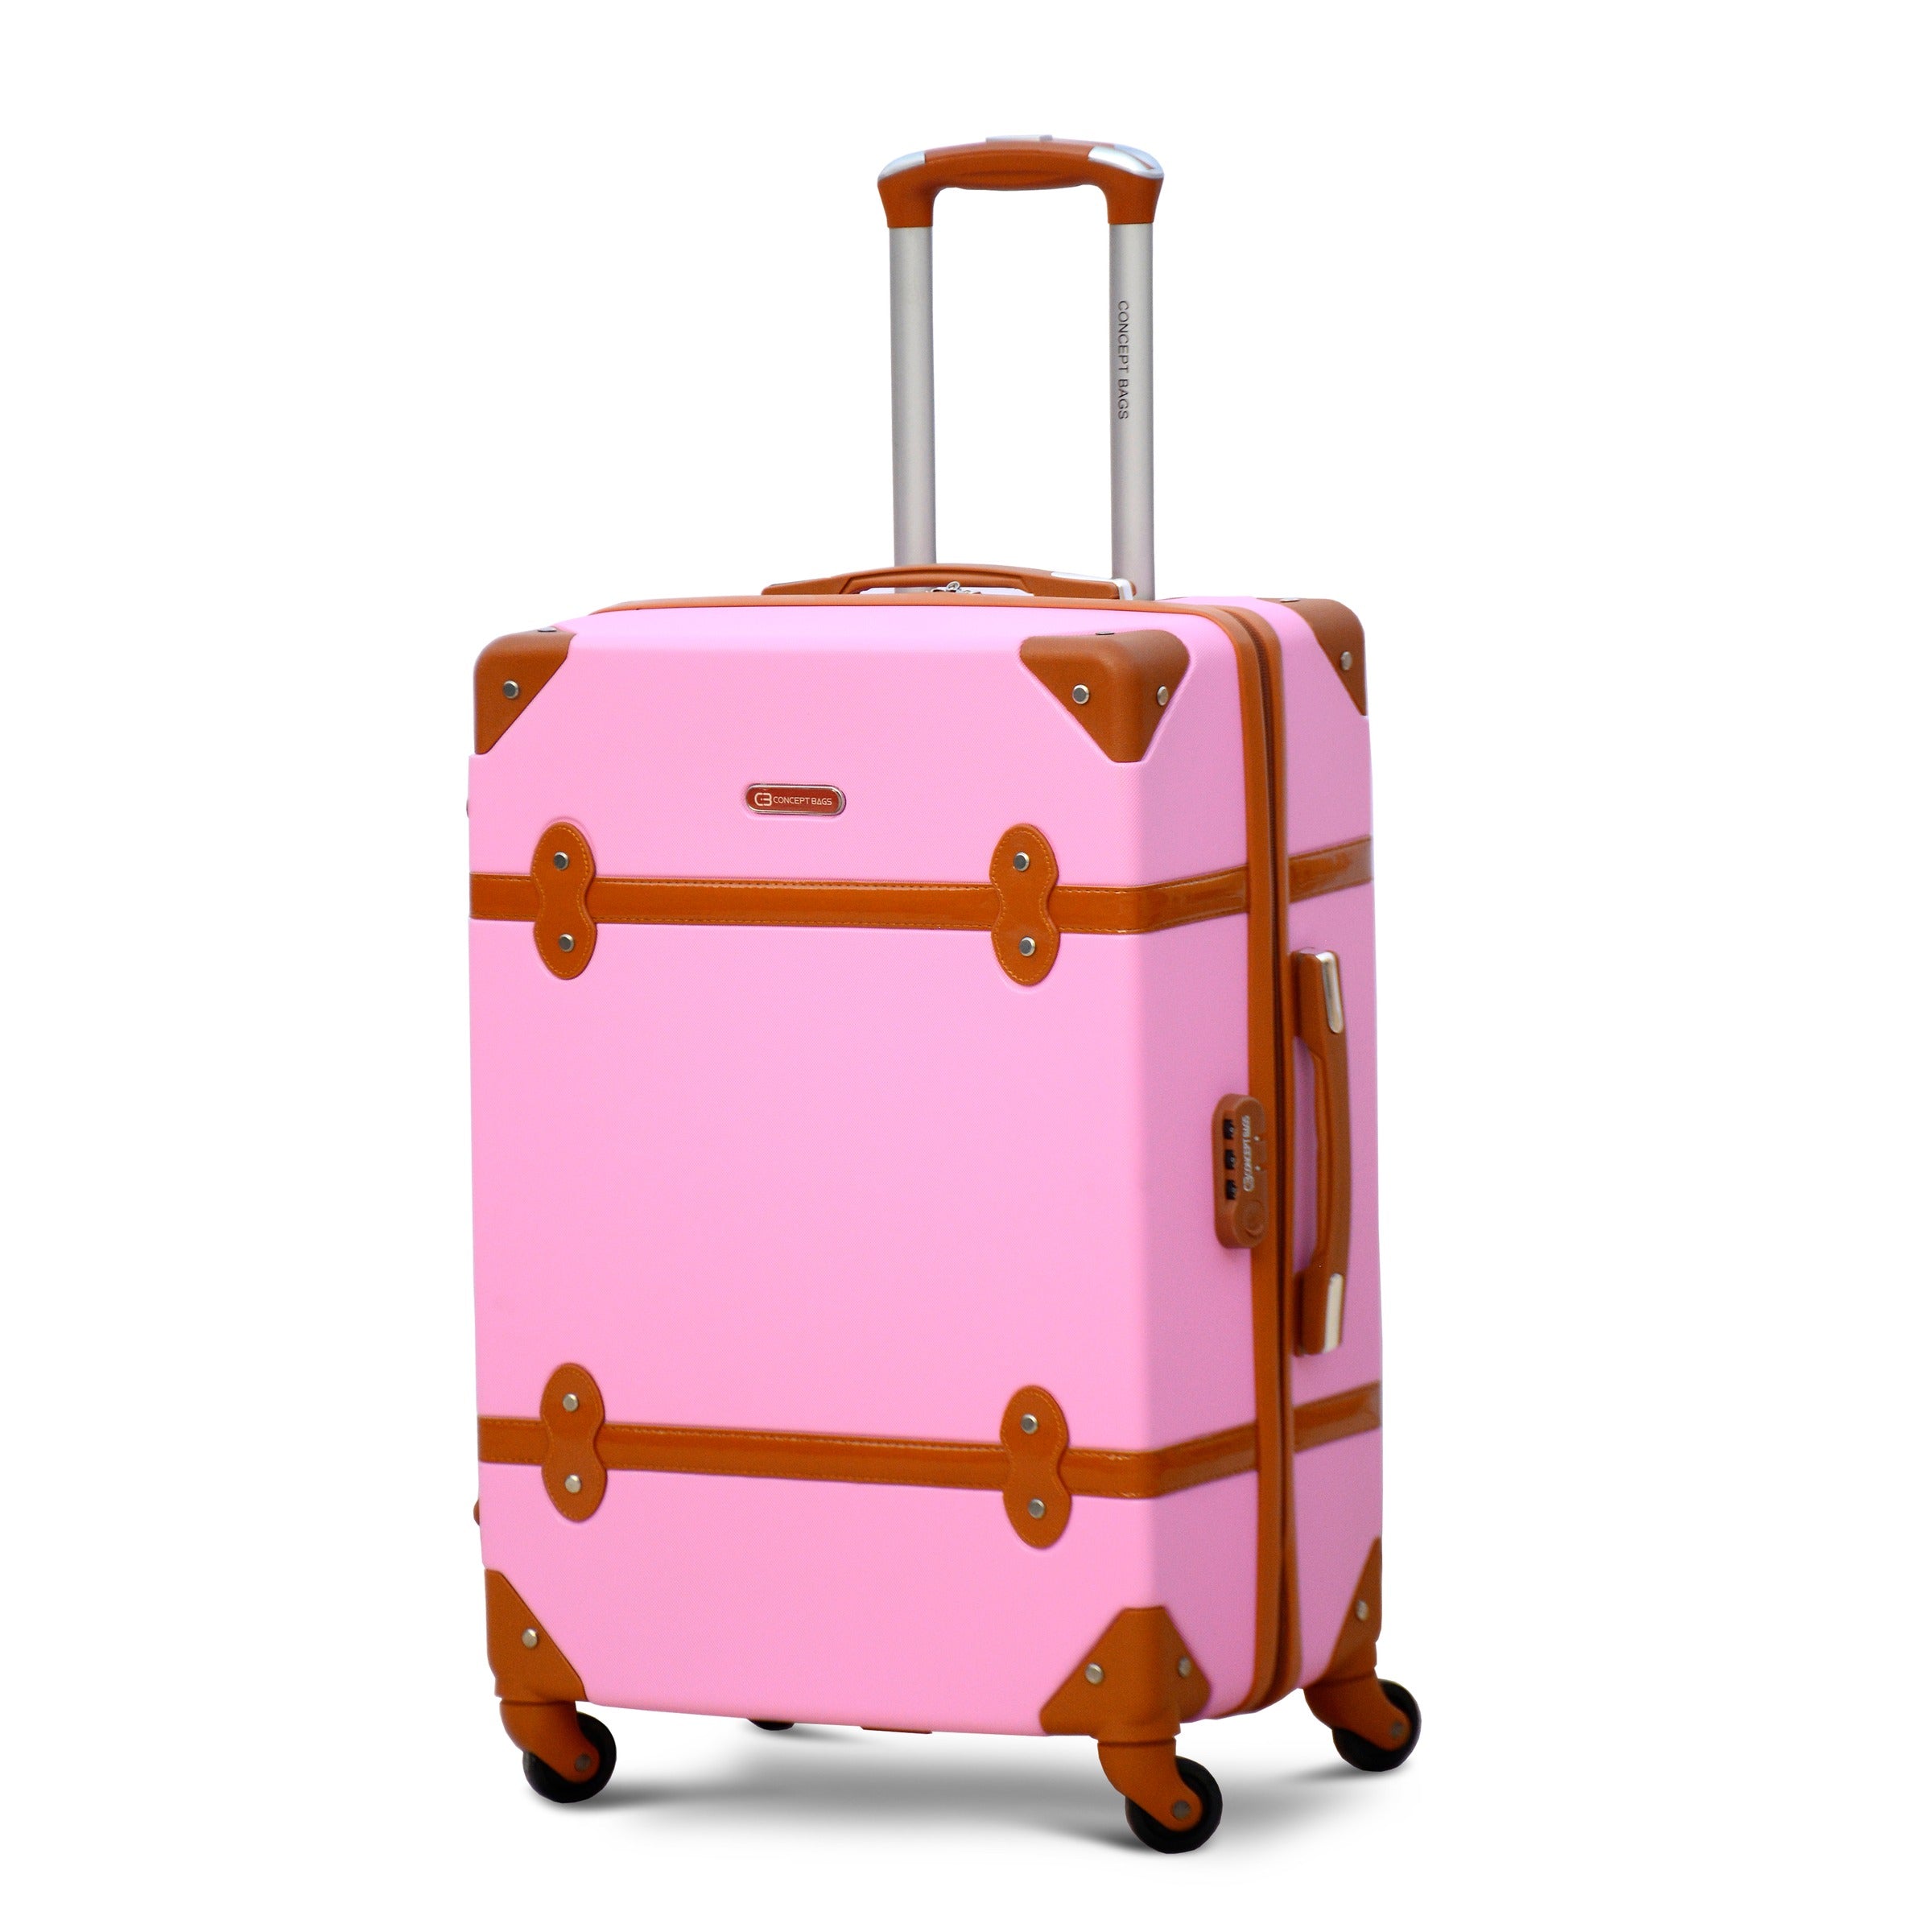 Corner Guard Lightweight ABS Luggage | 4 Pcs Full Set 7” 20” 24” 28 Inches | Pink  Hard Case Trolley Bag